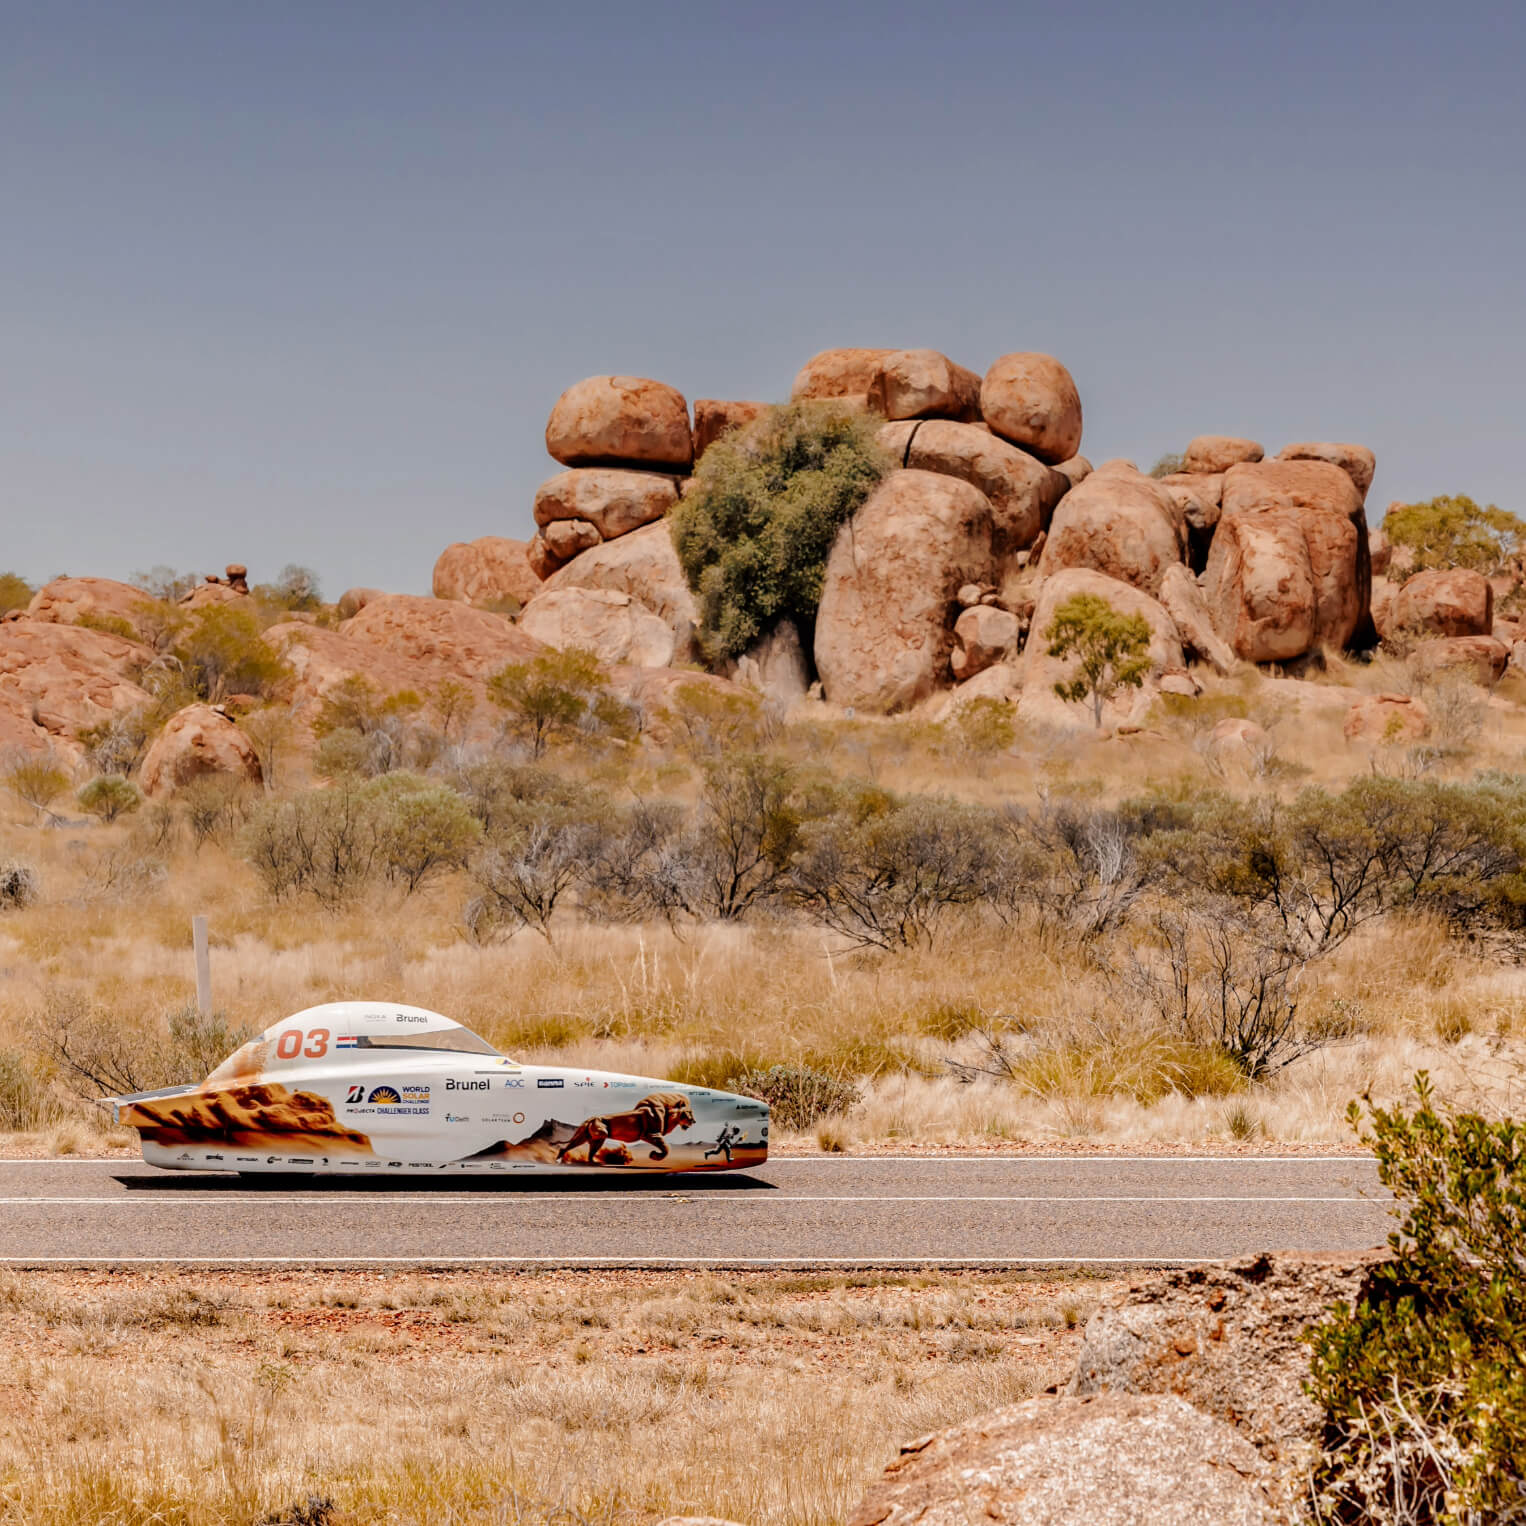 The Brunel Solar Team car driving on a road in the desert